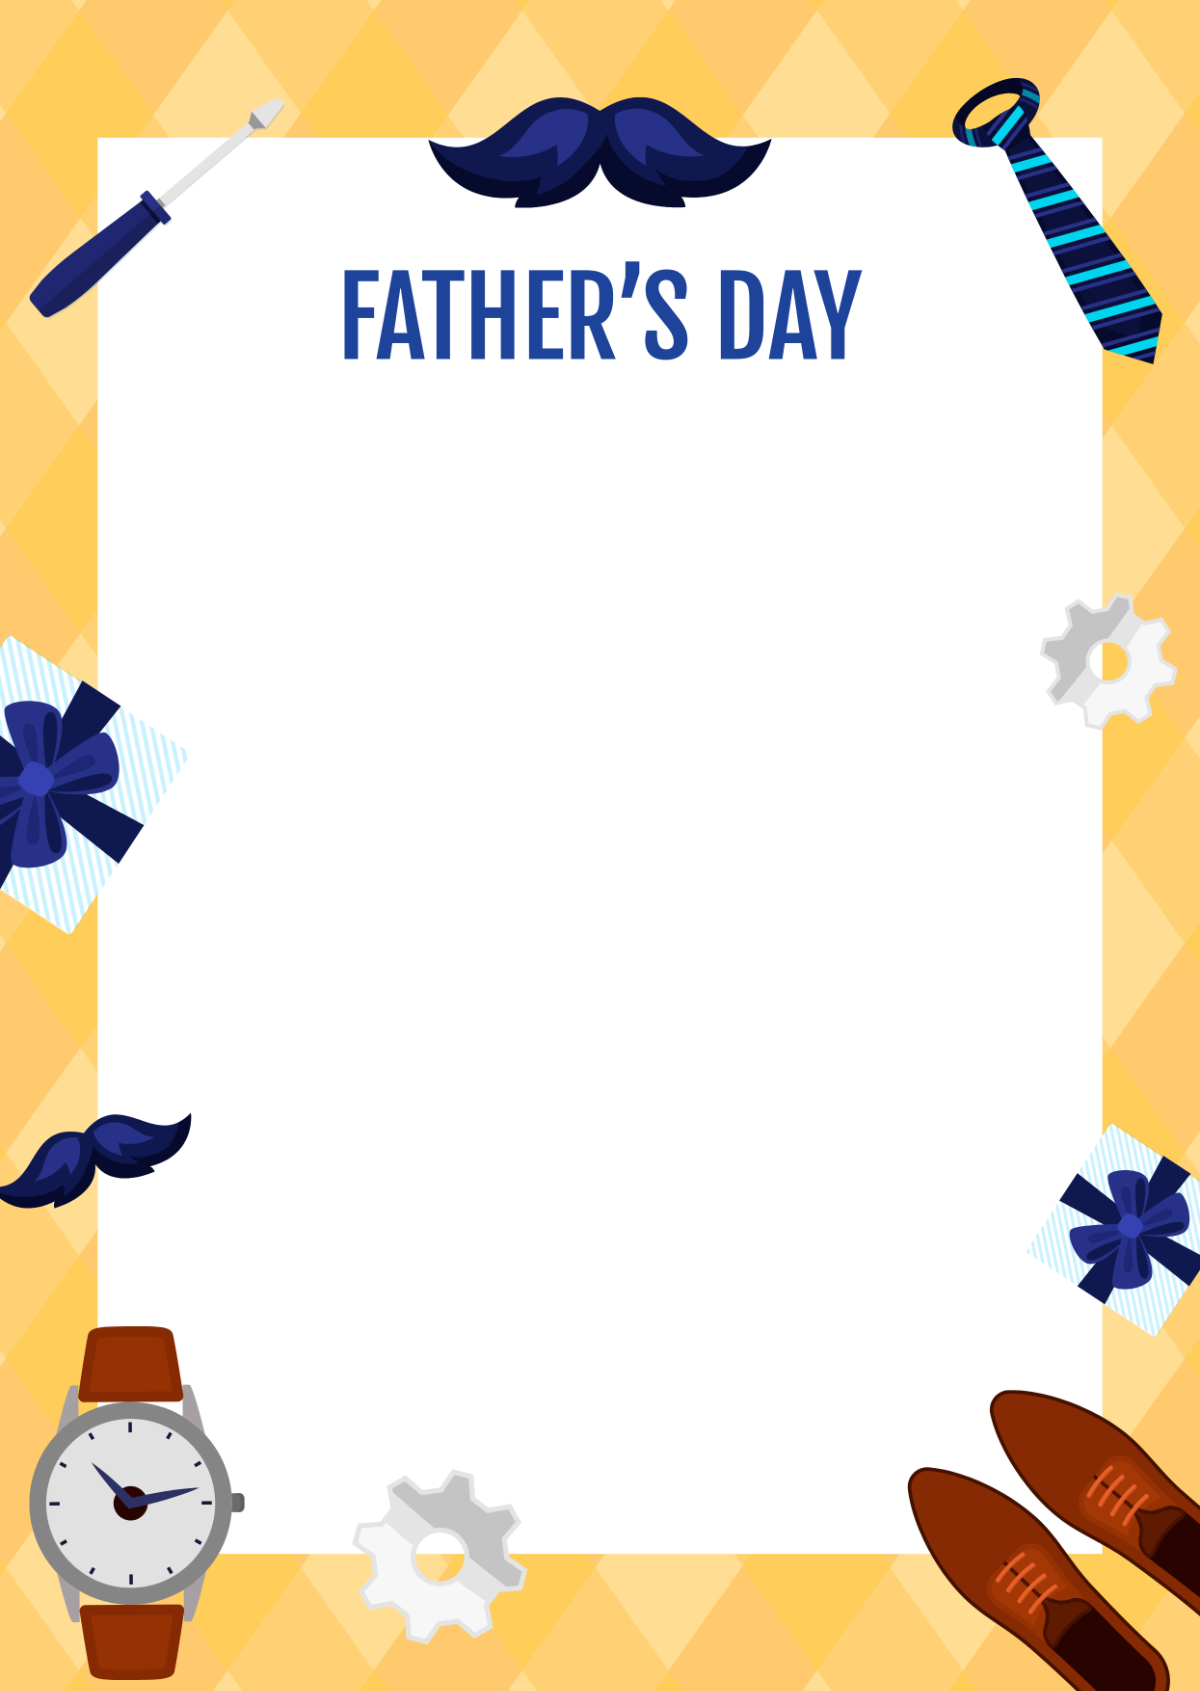 Free Father's Day Menu Background Template